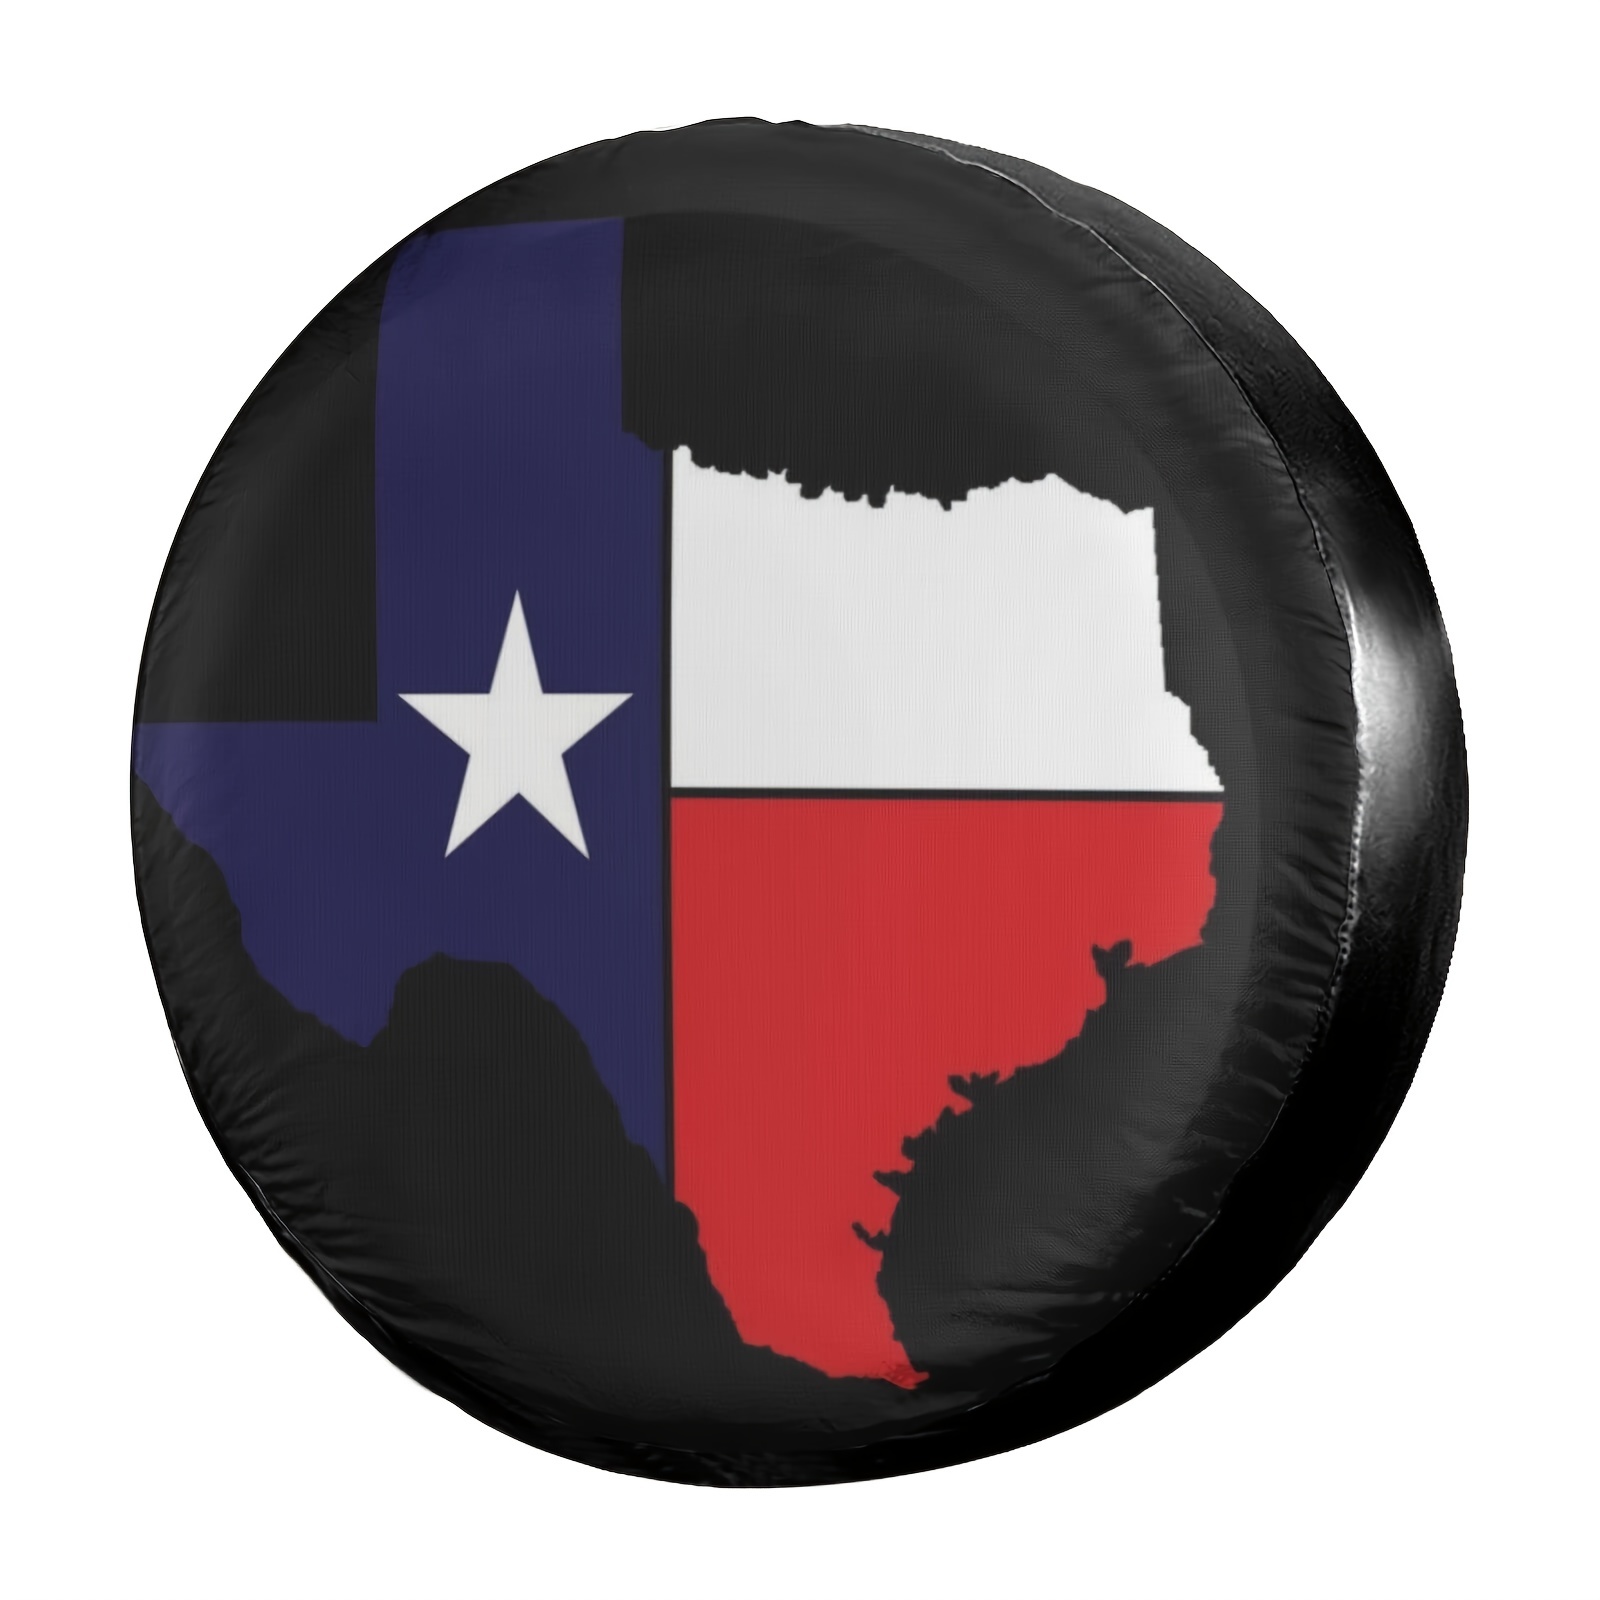 Stand for The Flag, Kneel for The Cross Spare Tire Cover Waterproof Du - 4